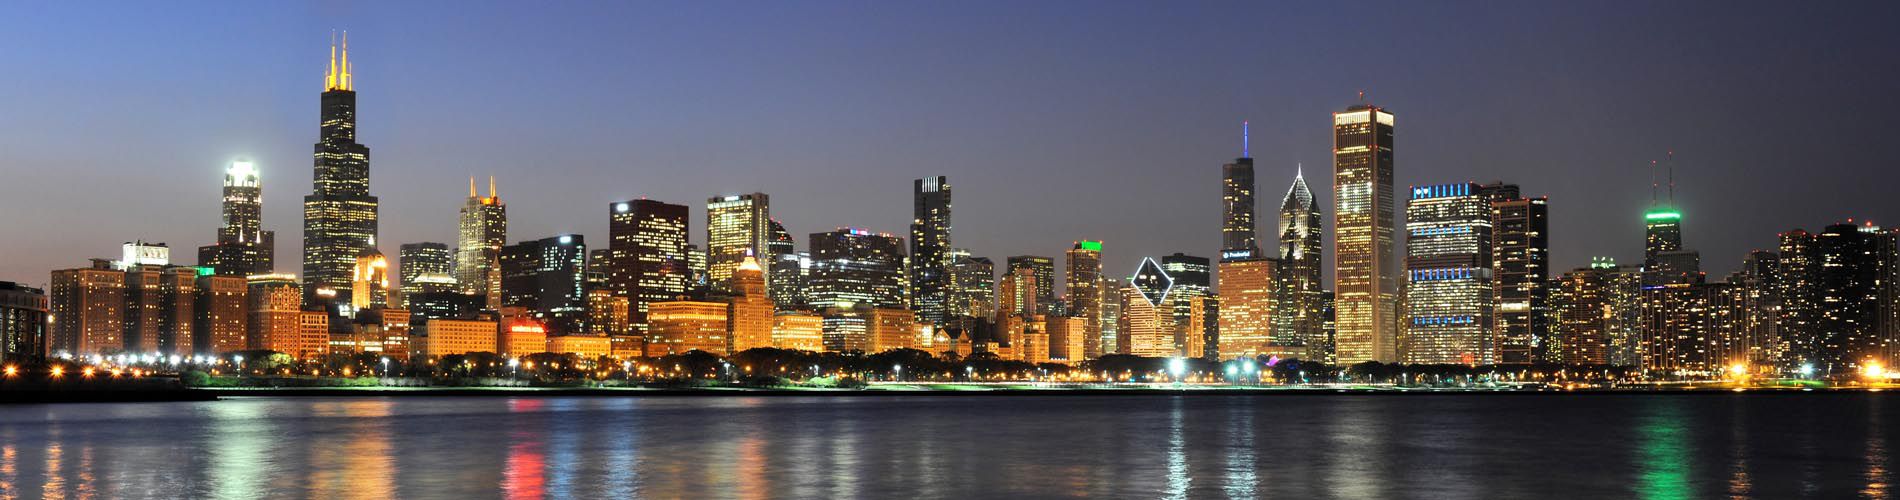 A skyline image of Downtown Chicago.